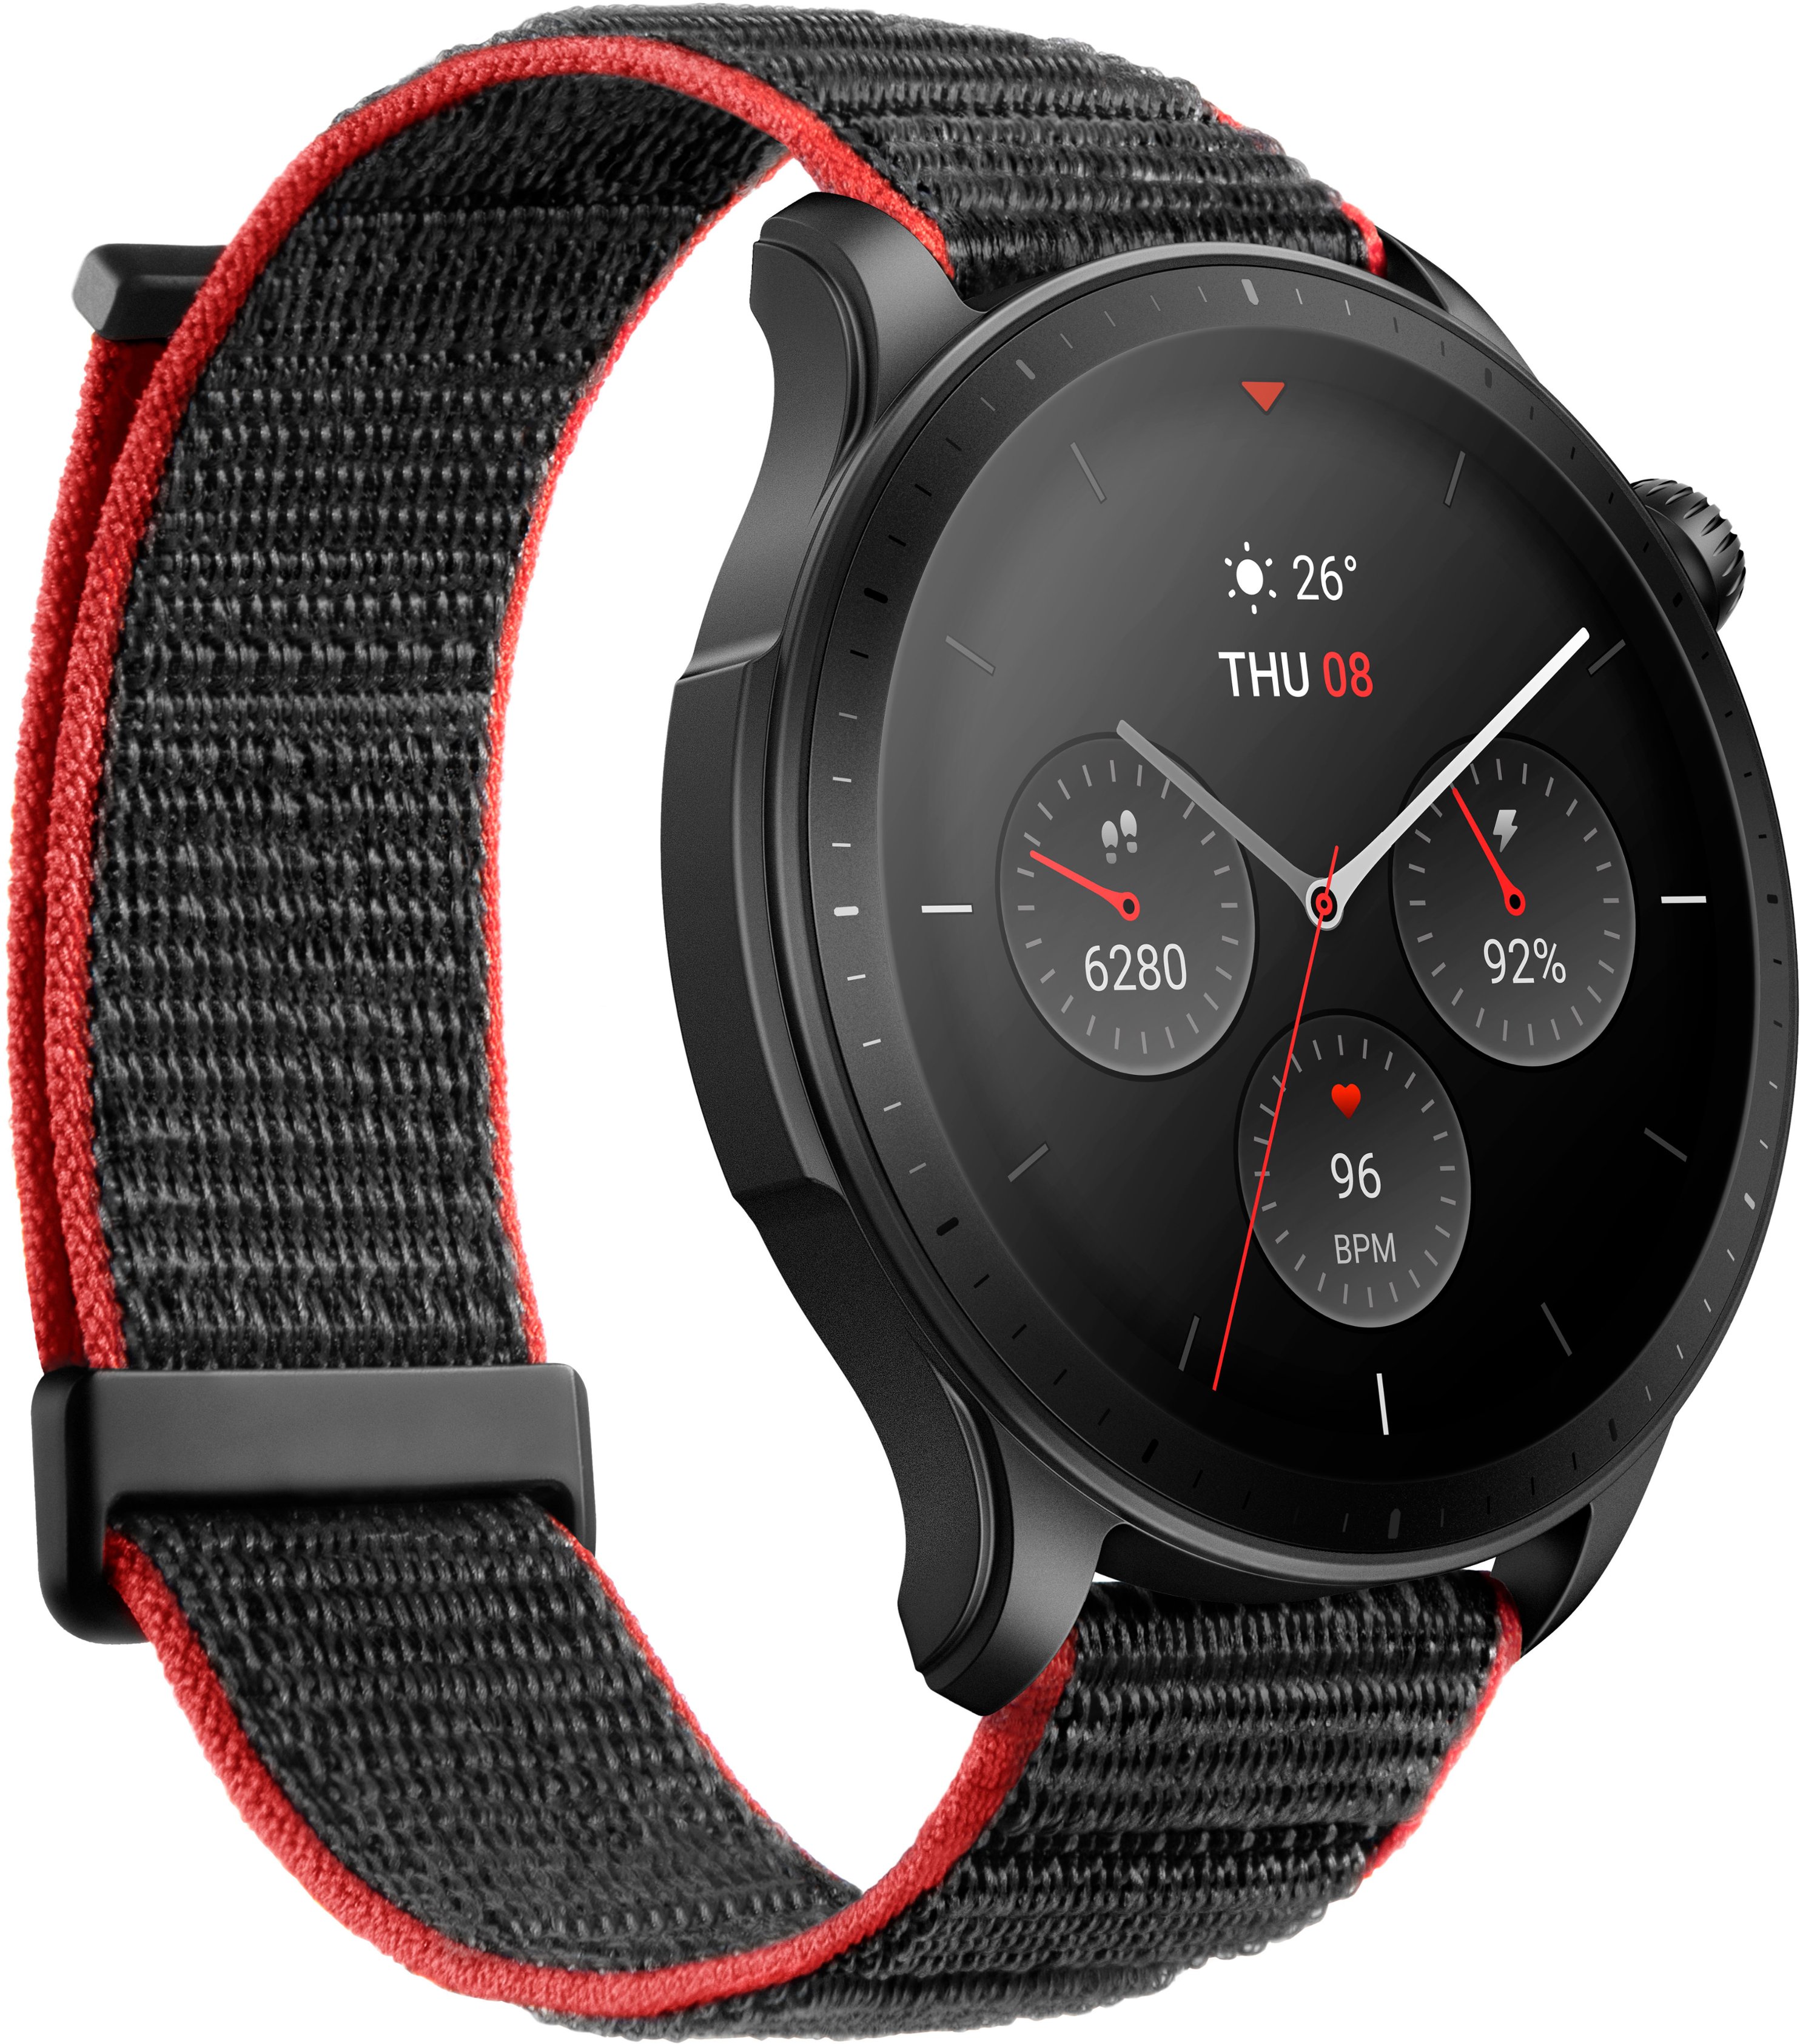 Amazfit GTR 4 Smartwatch Review - Consumer Reports